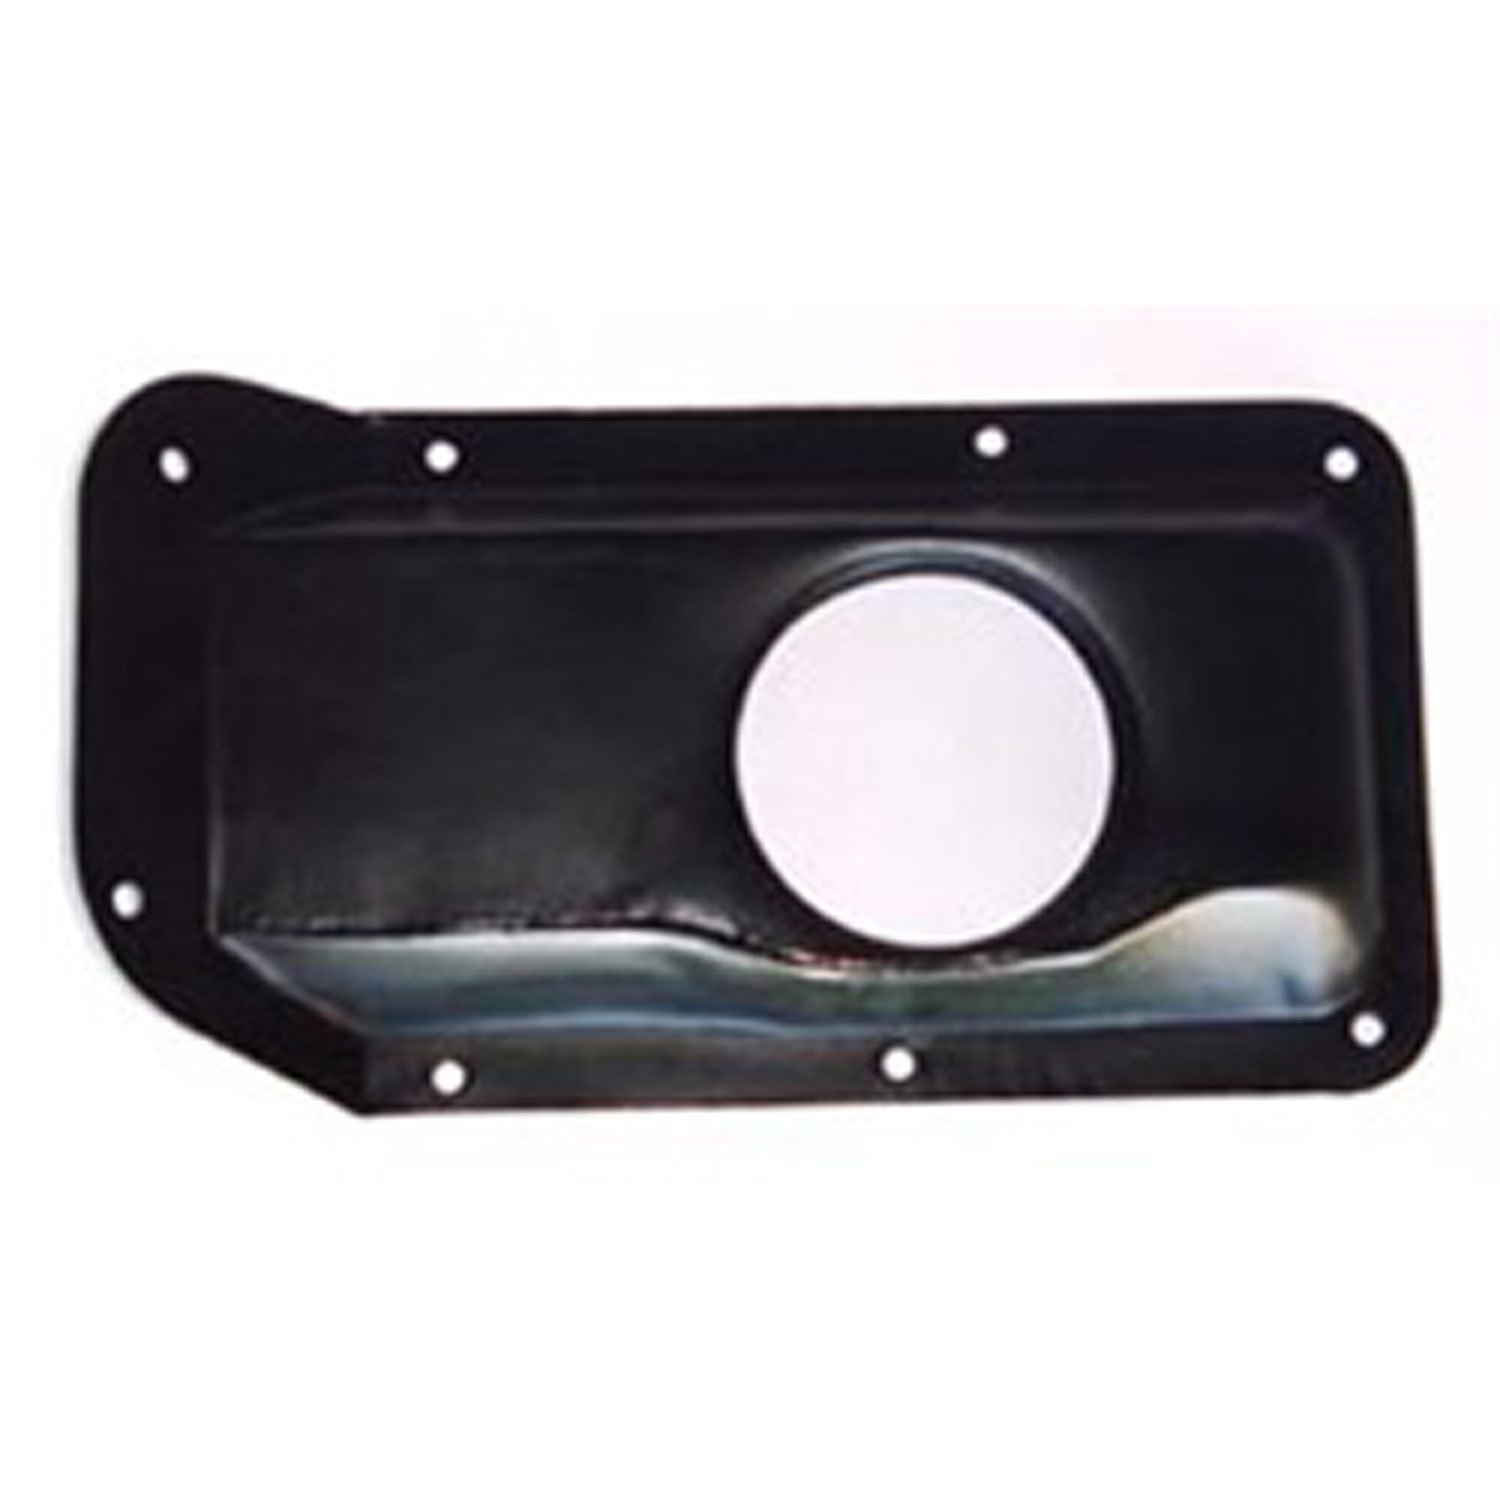 This center transmission floor access cover from Omix-ADA fits 50-52 Willys M38.